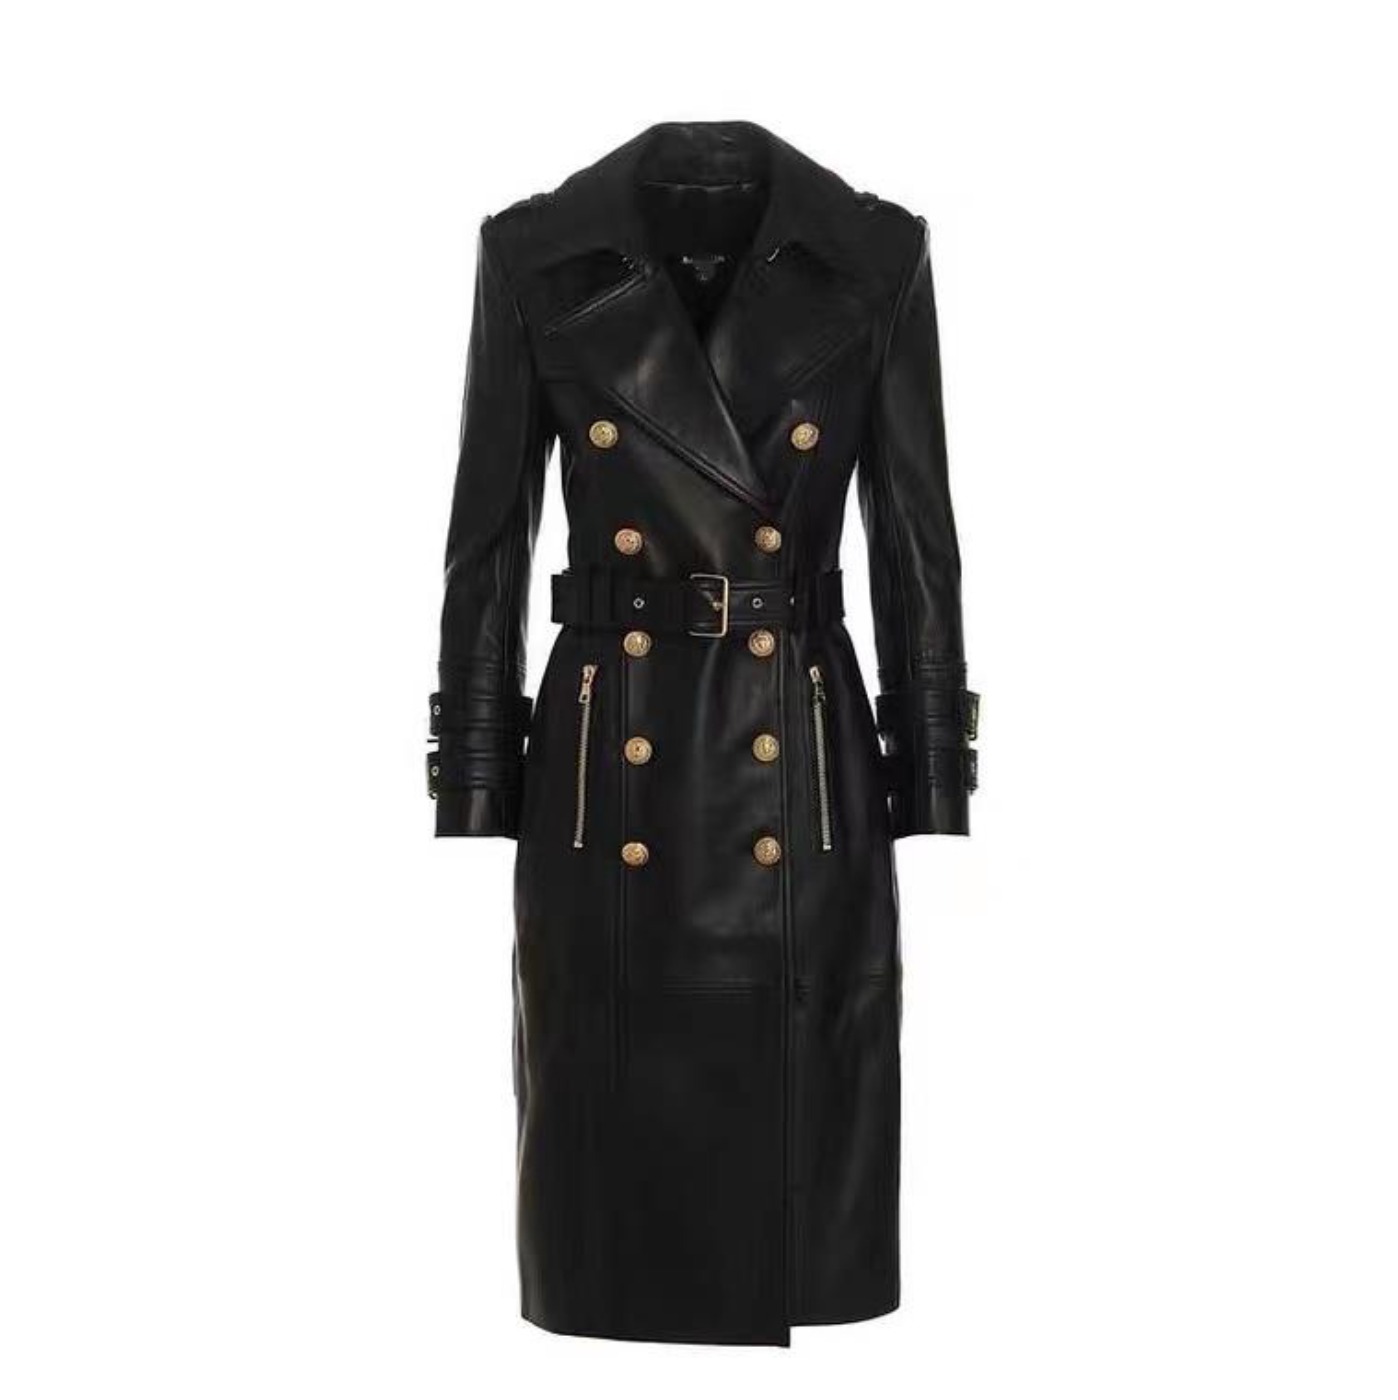 Leather trench coat with gold botten